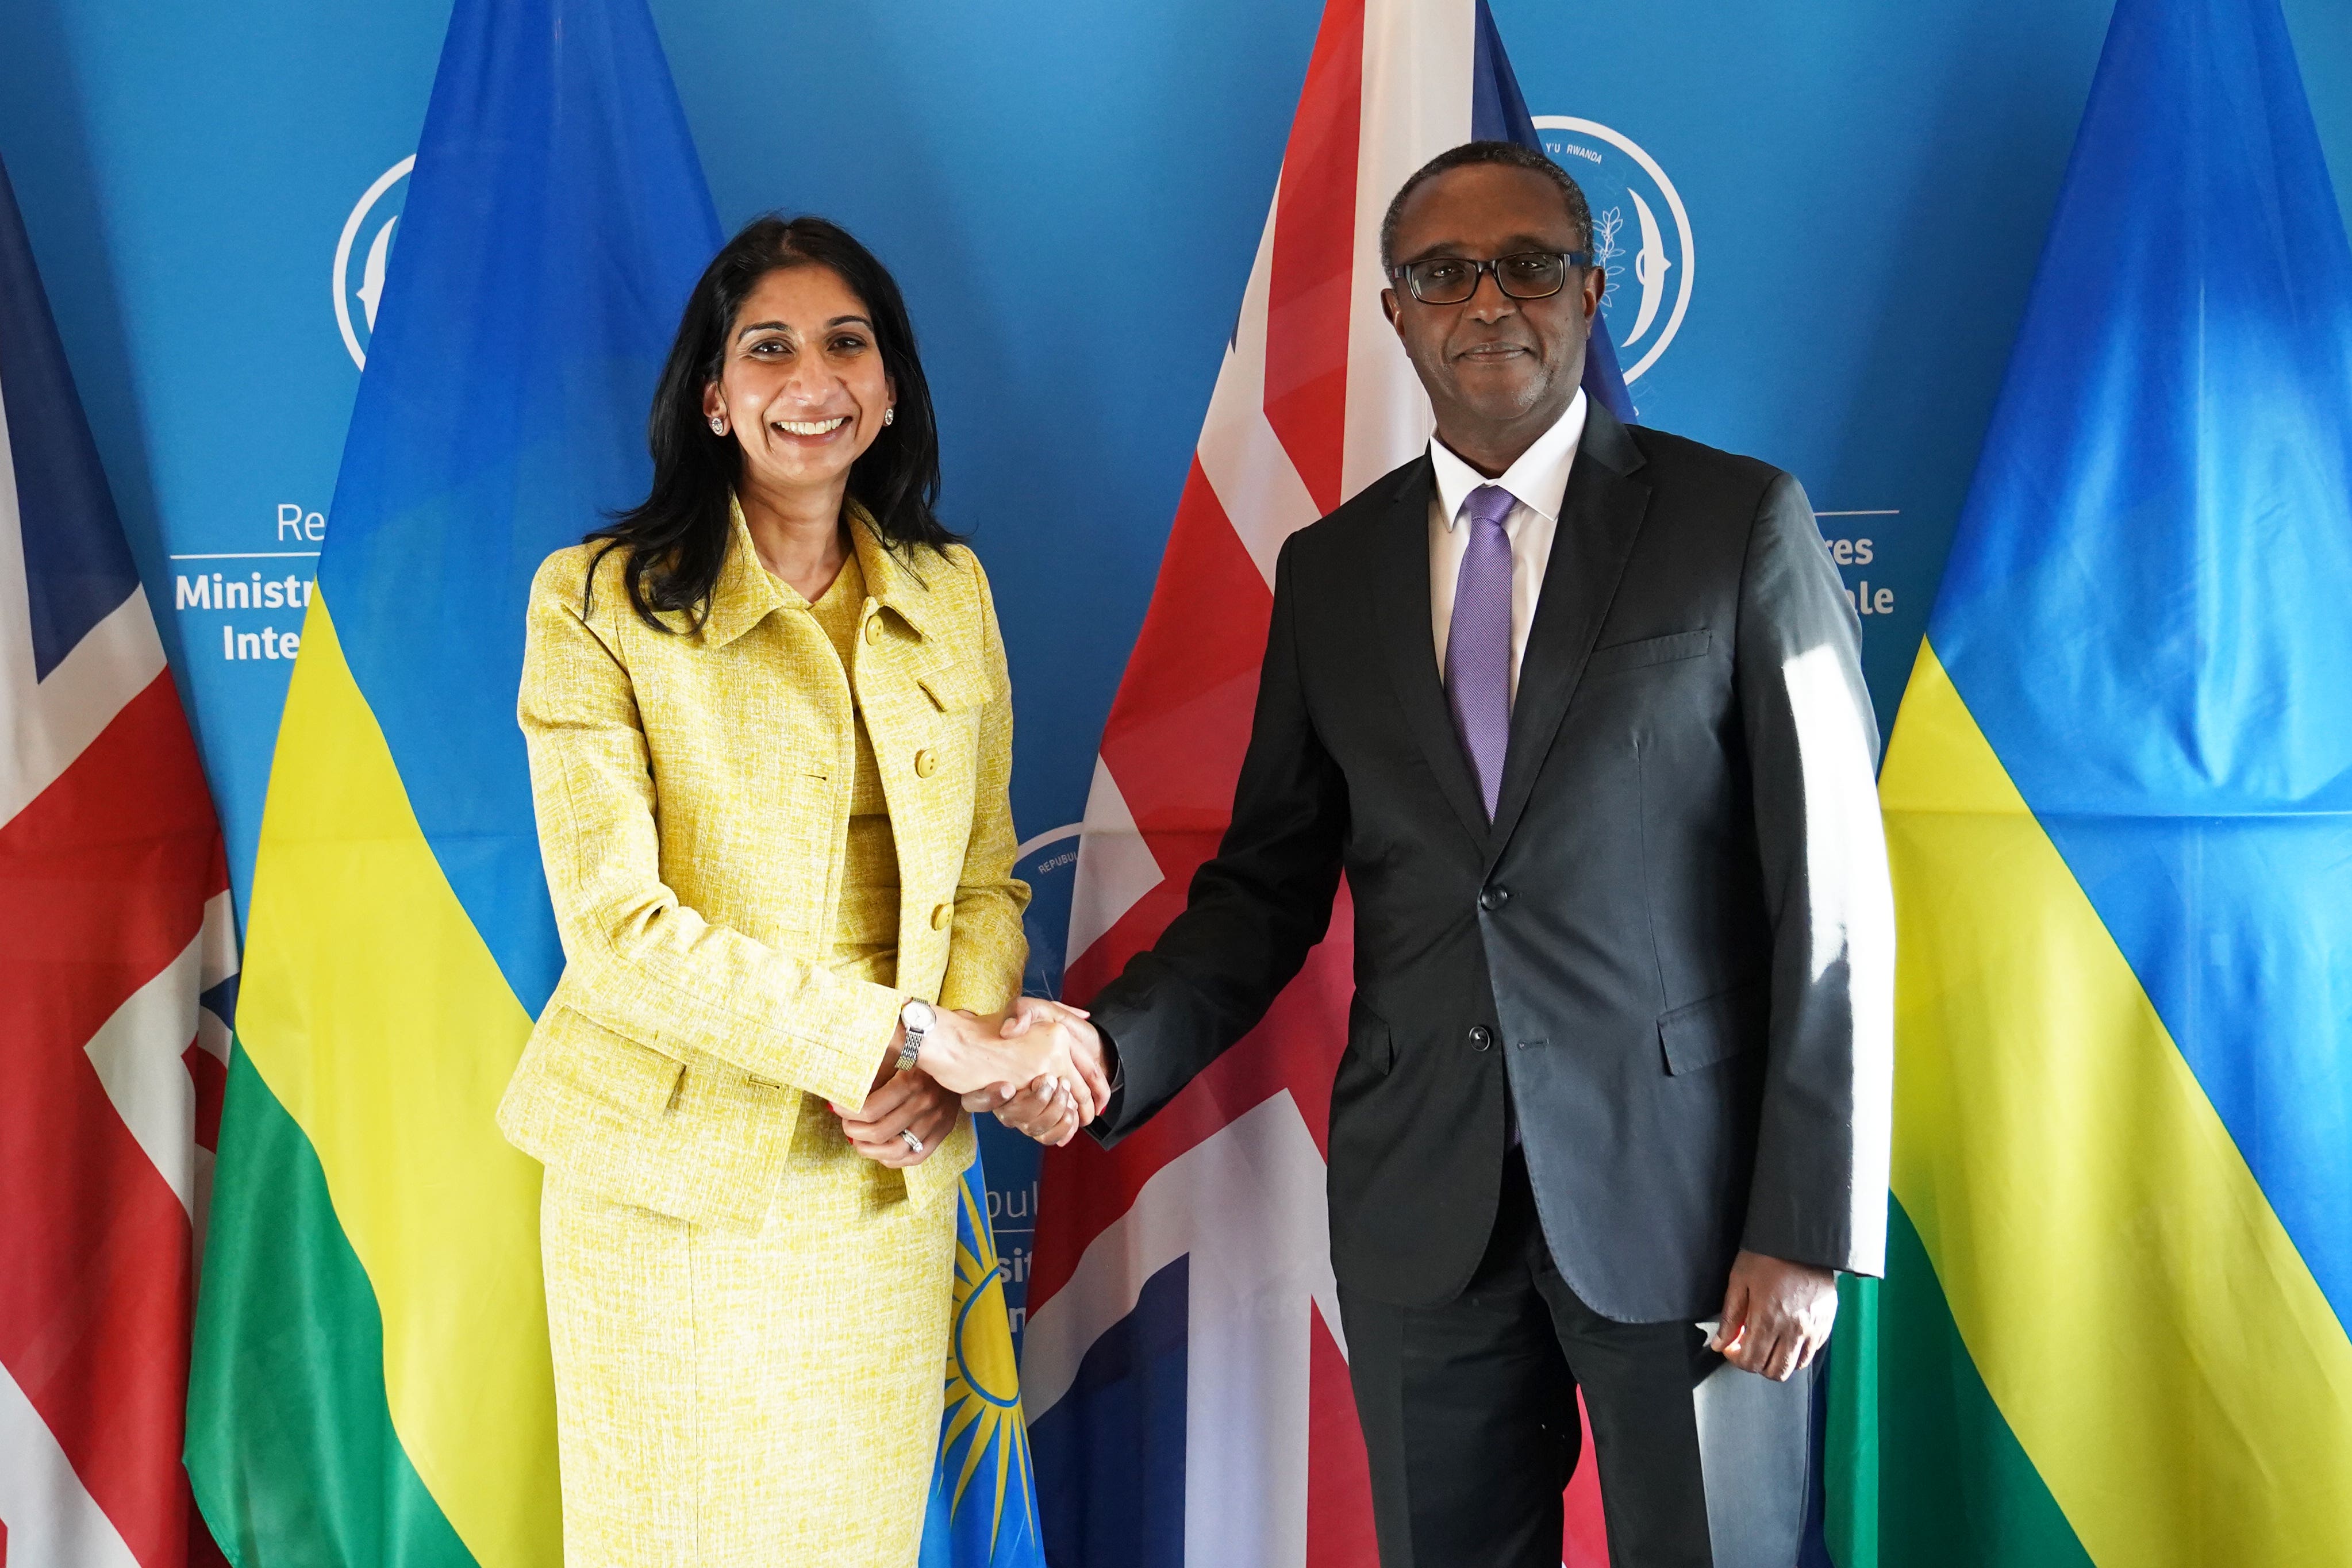 Suella Braverman’s official visit to Rwanda in March was her third visit to the country